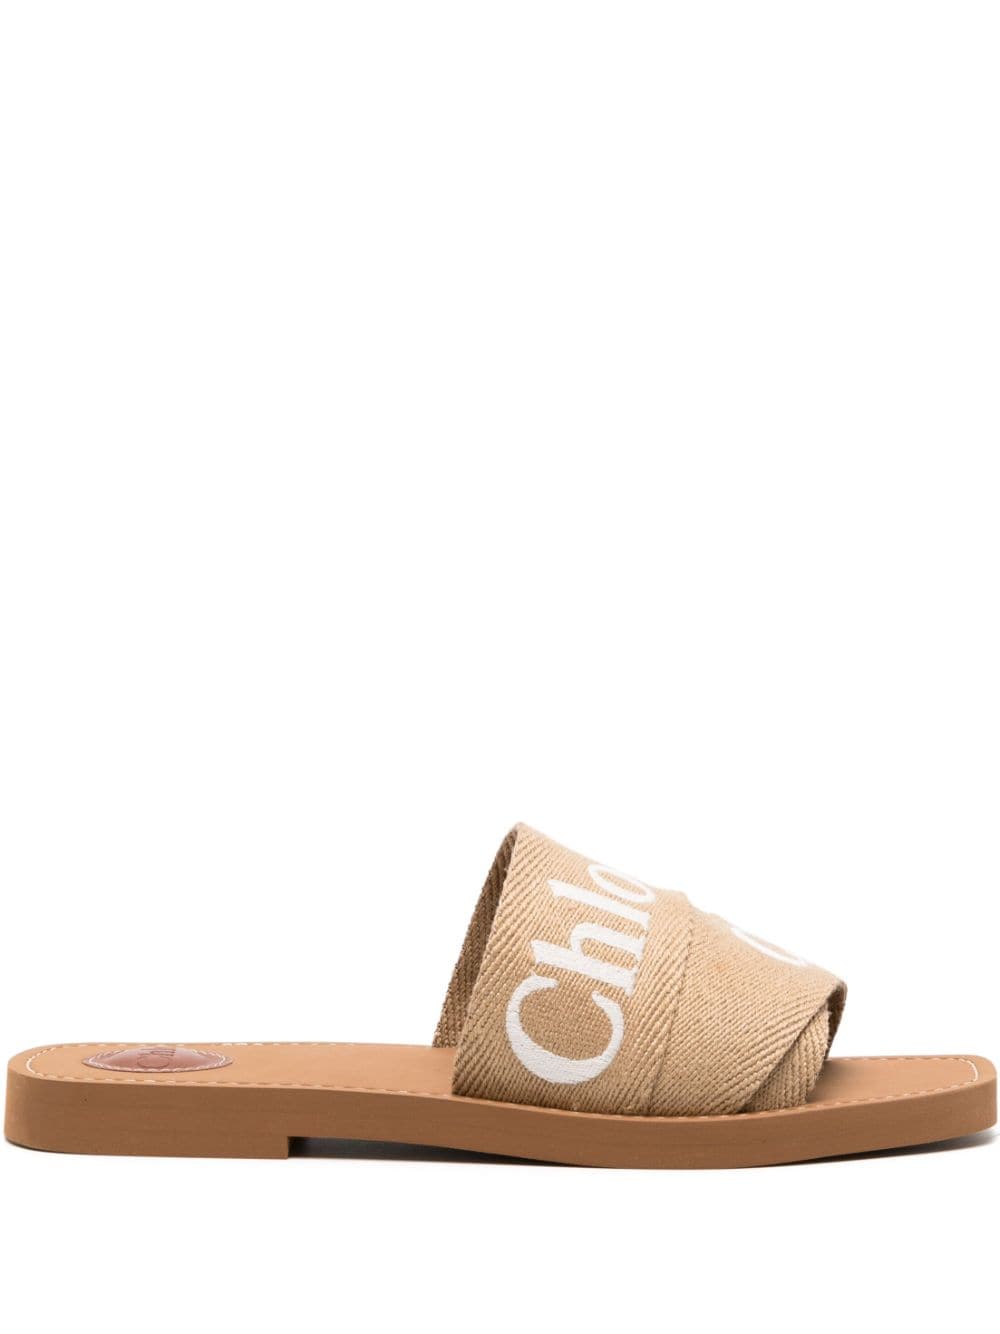 Chloé Woody logo-embroidered flat sandals